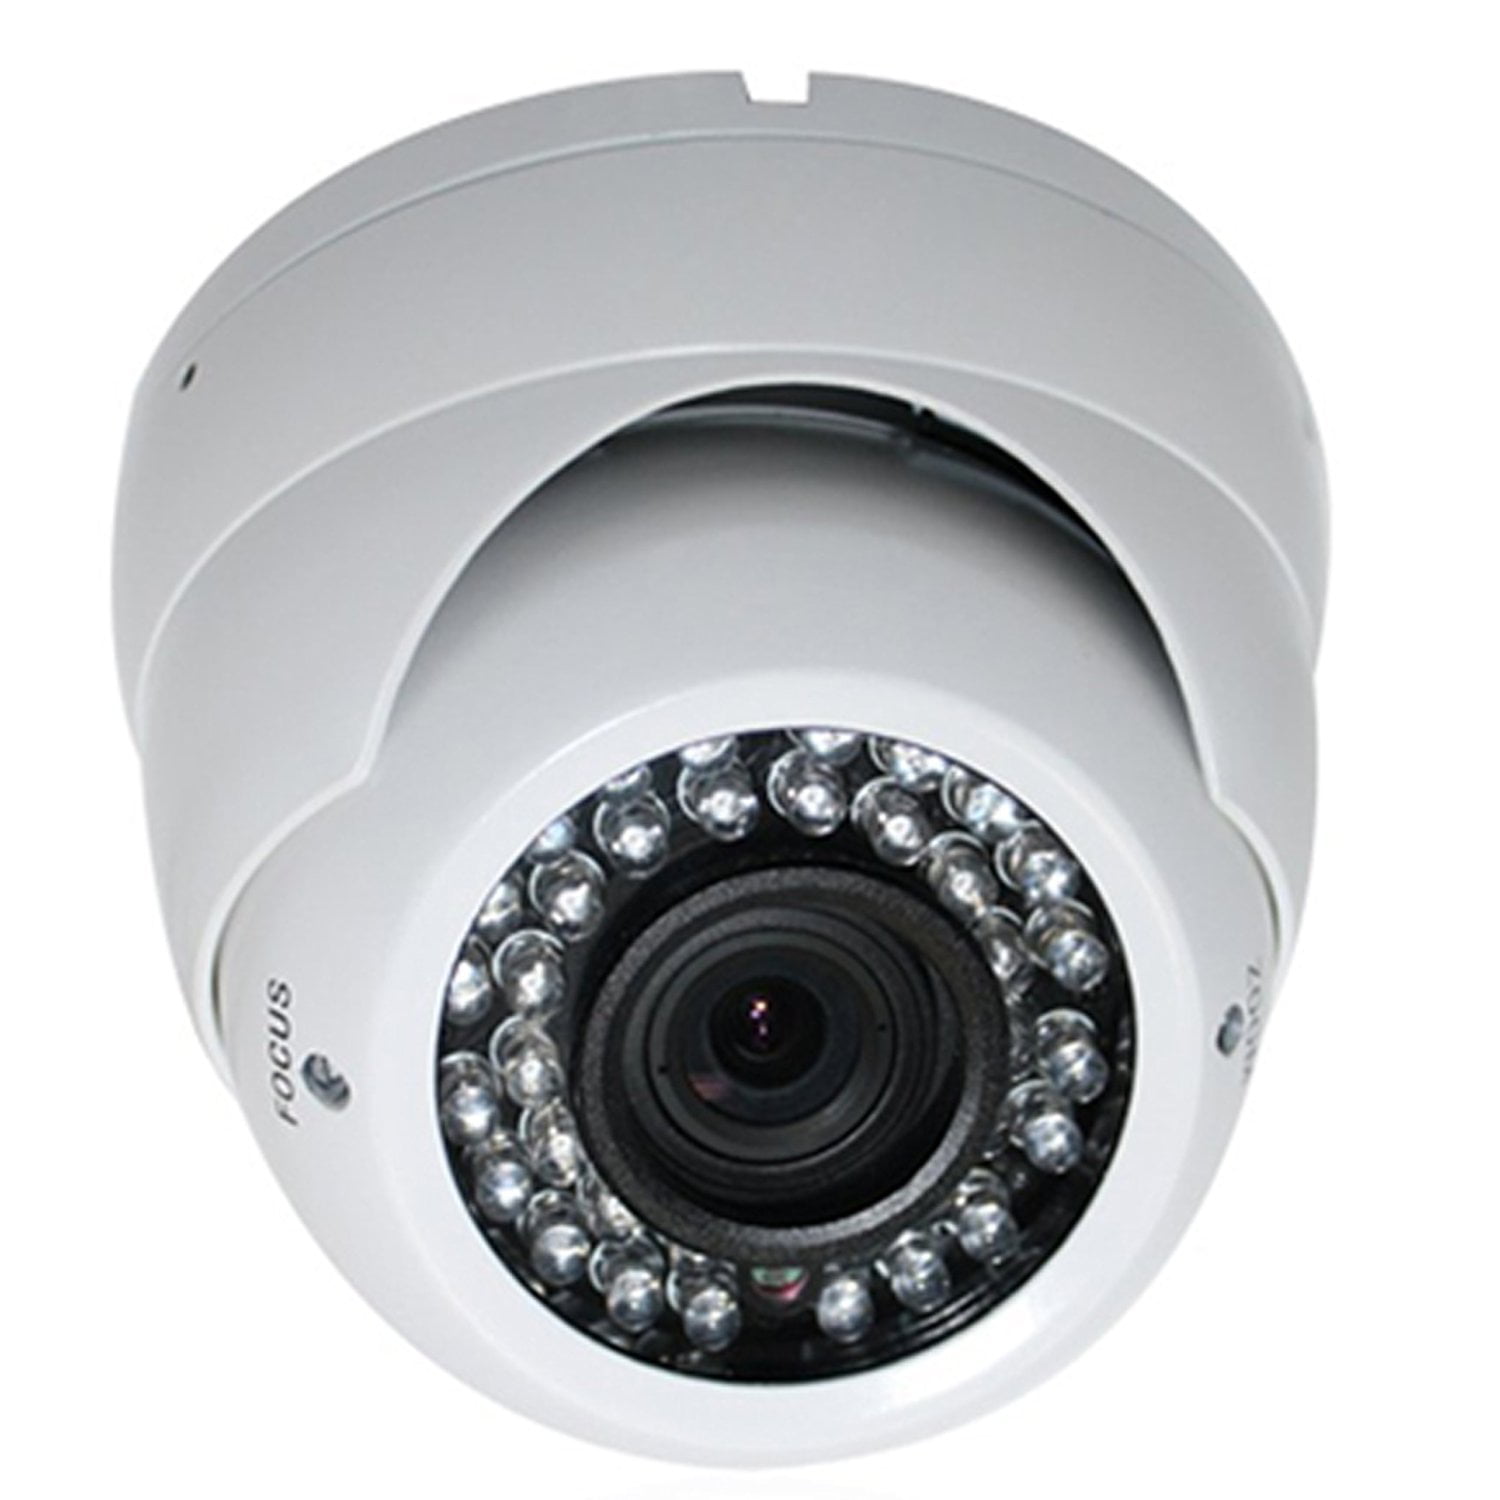 SPT INS-D1200W Outdoor 3 Axis IR Dome Camera 1000TVL 2.8mm to 12mm ...